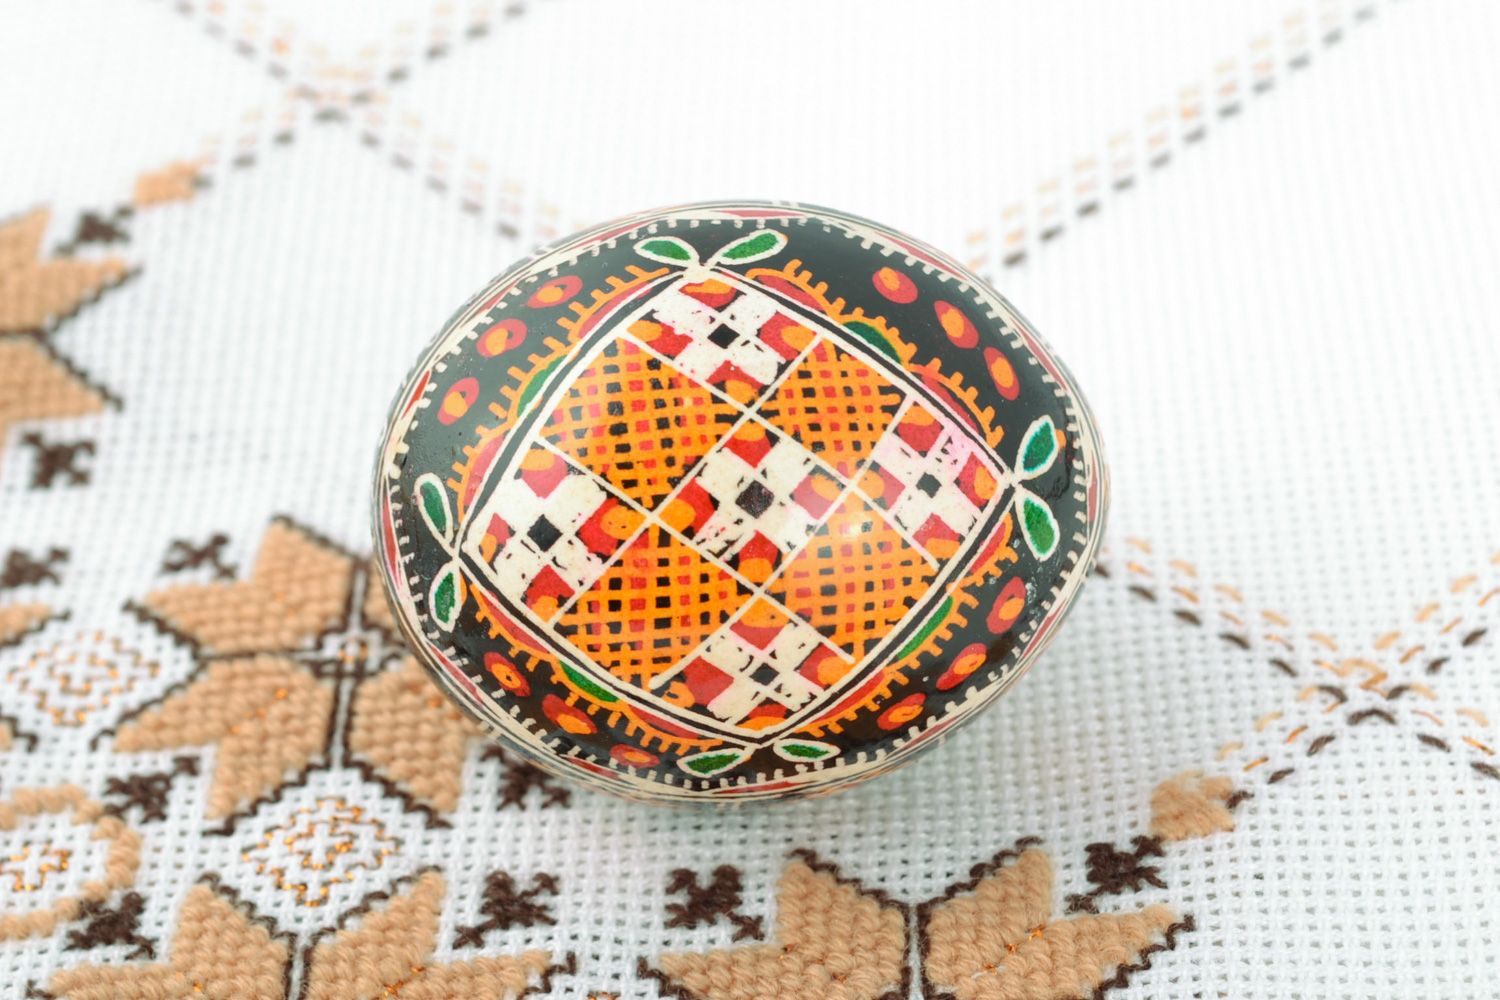 Homemade ornamented Easter egg pysanka with traditional painting made with hot wax photo 1